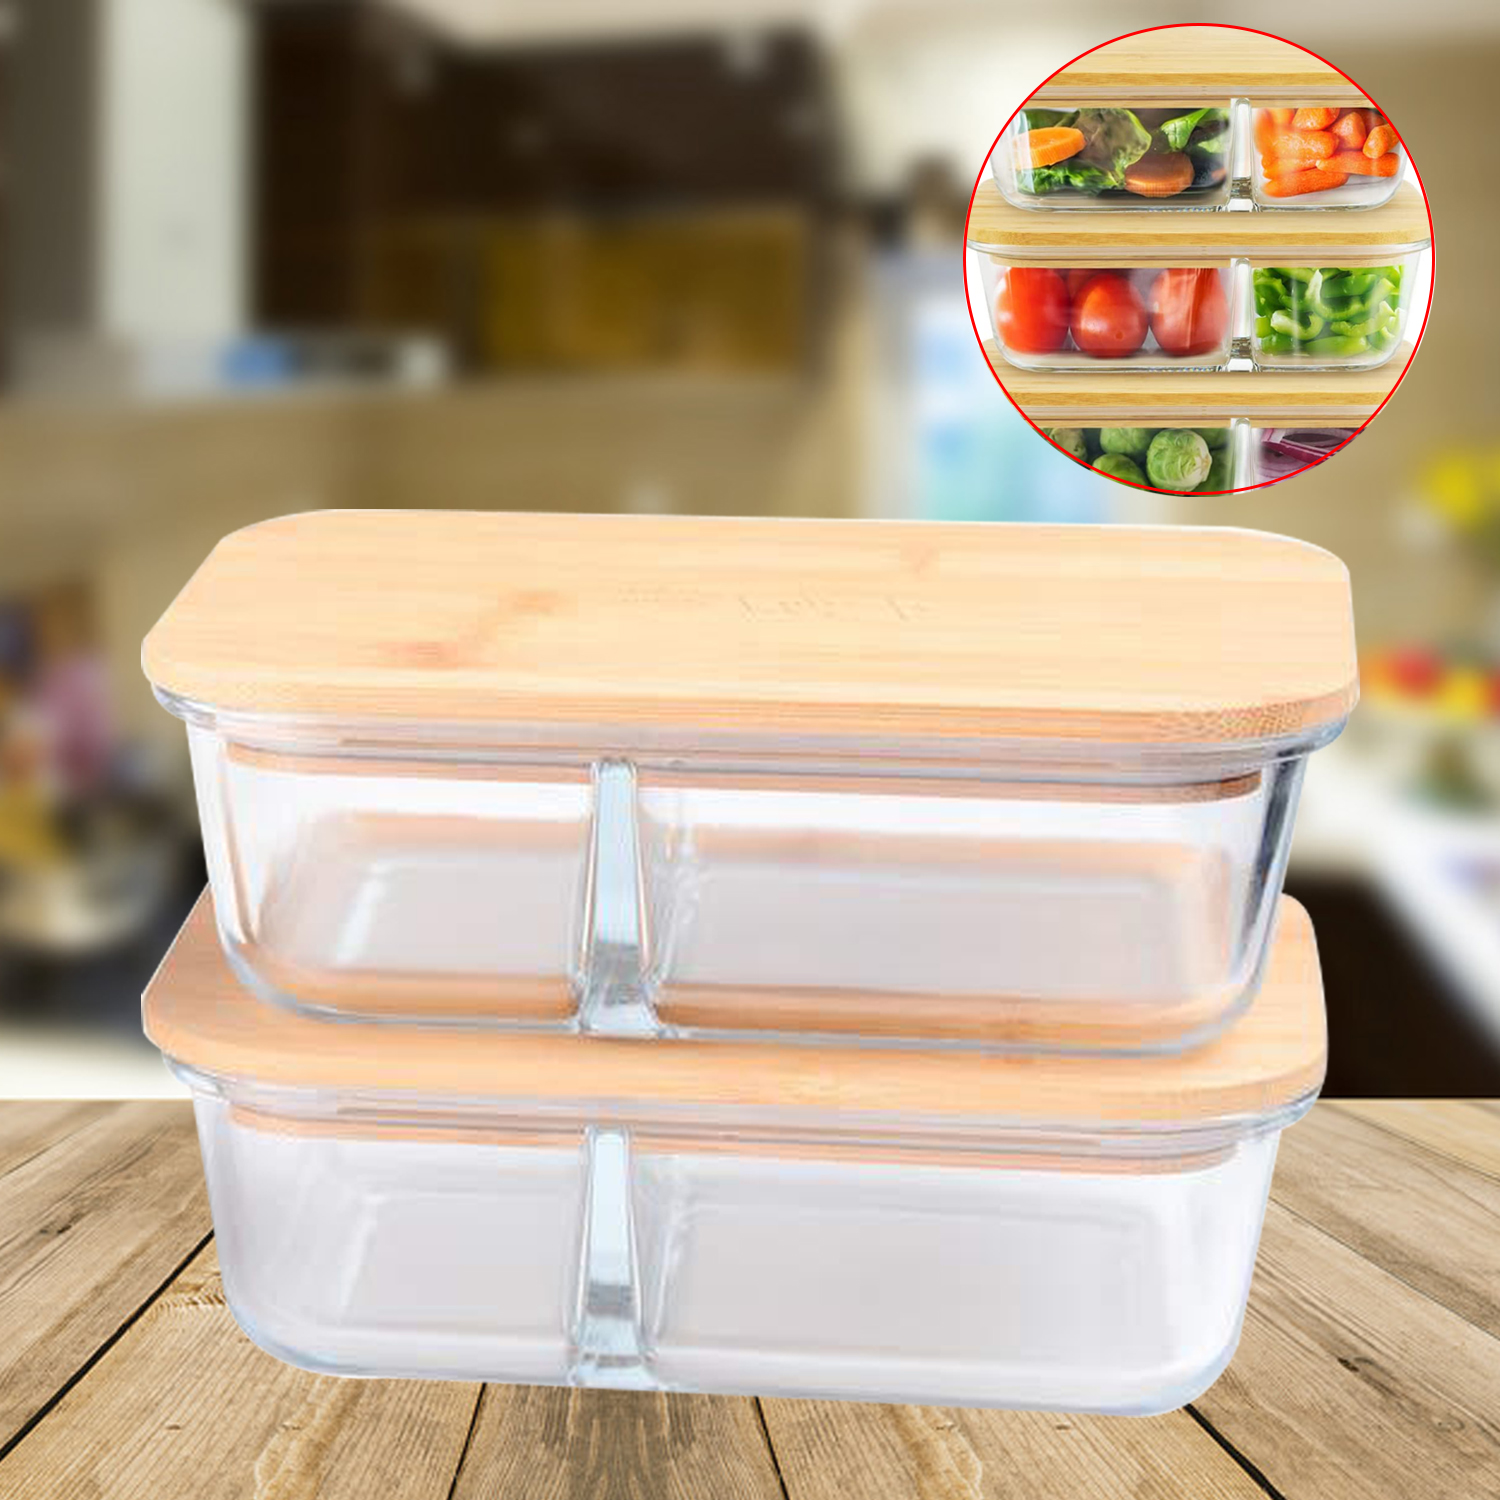 Glass Lunch Box Bamboo Wood Cover Fresh Bowl Storage Box Portable Microwave Students Picnic Bento Food Container